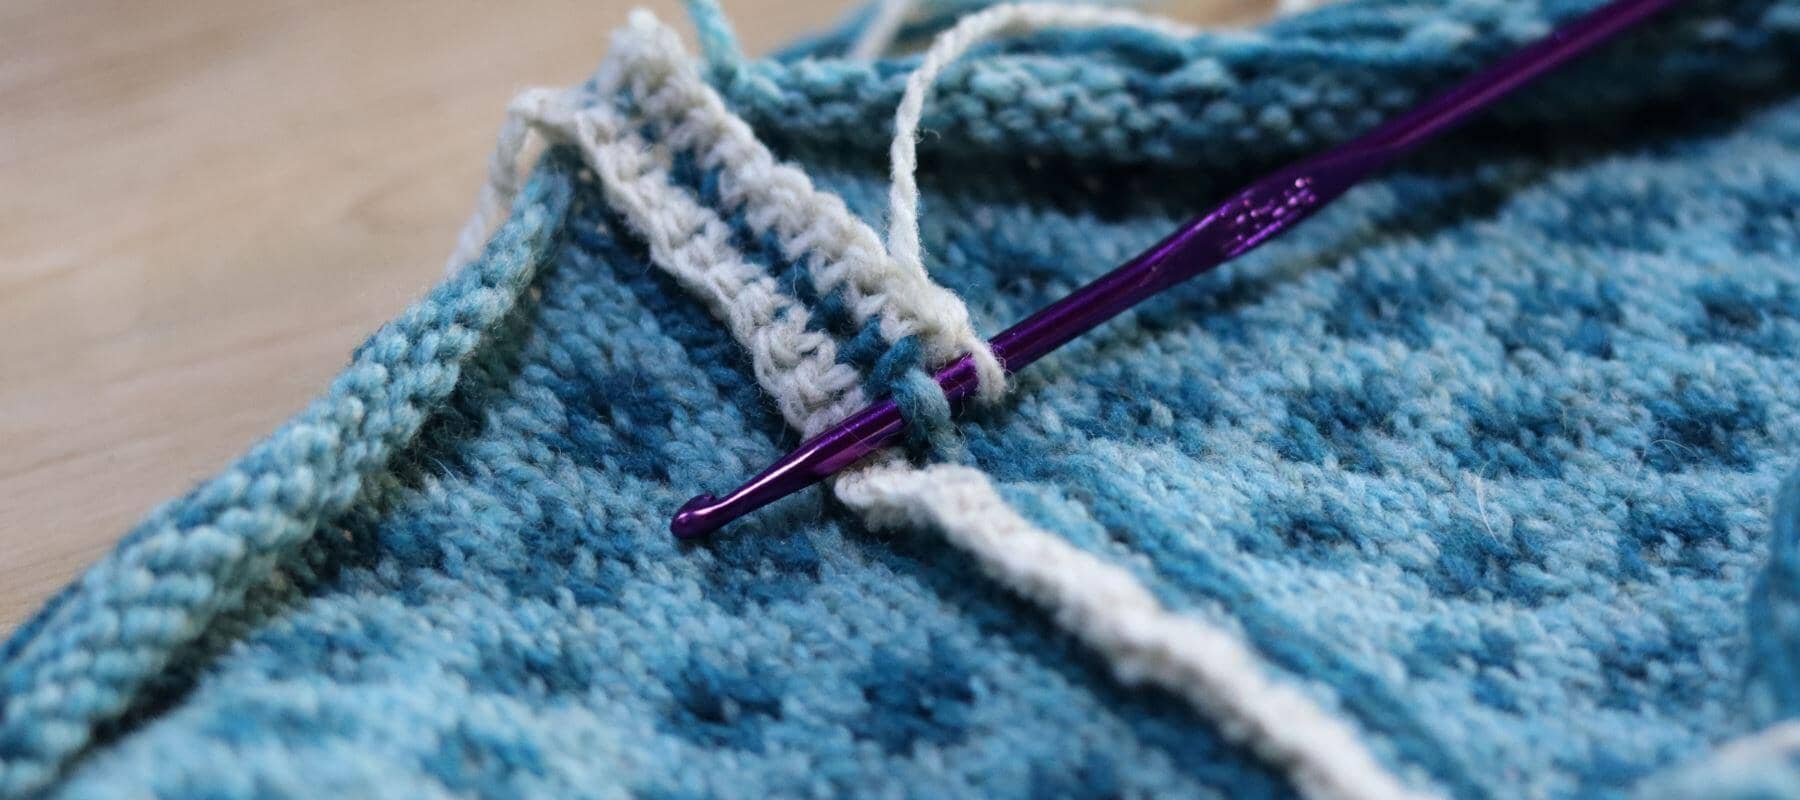 Mastering Steeking: Conquer Your Yarn Fears with Confidence